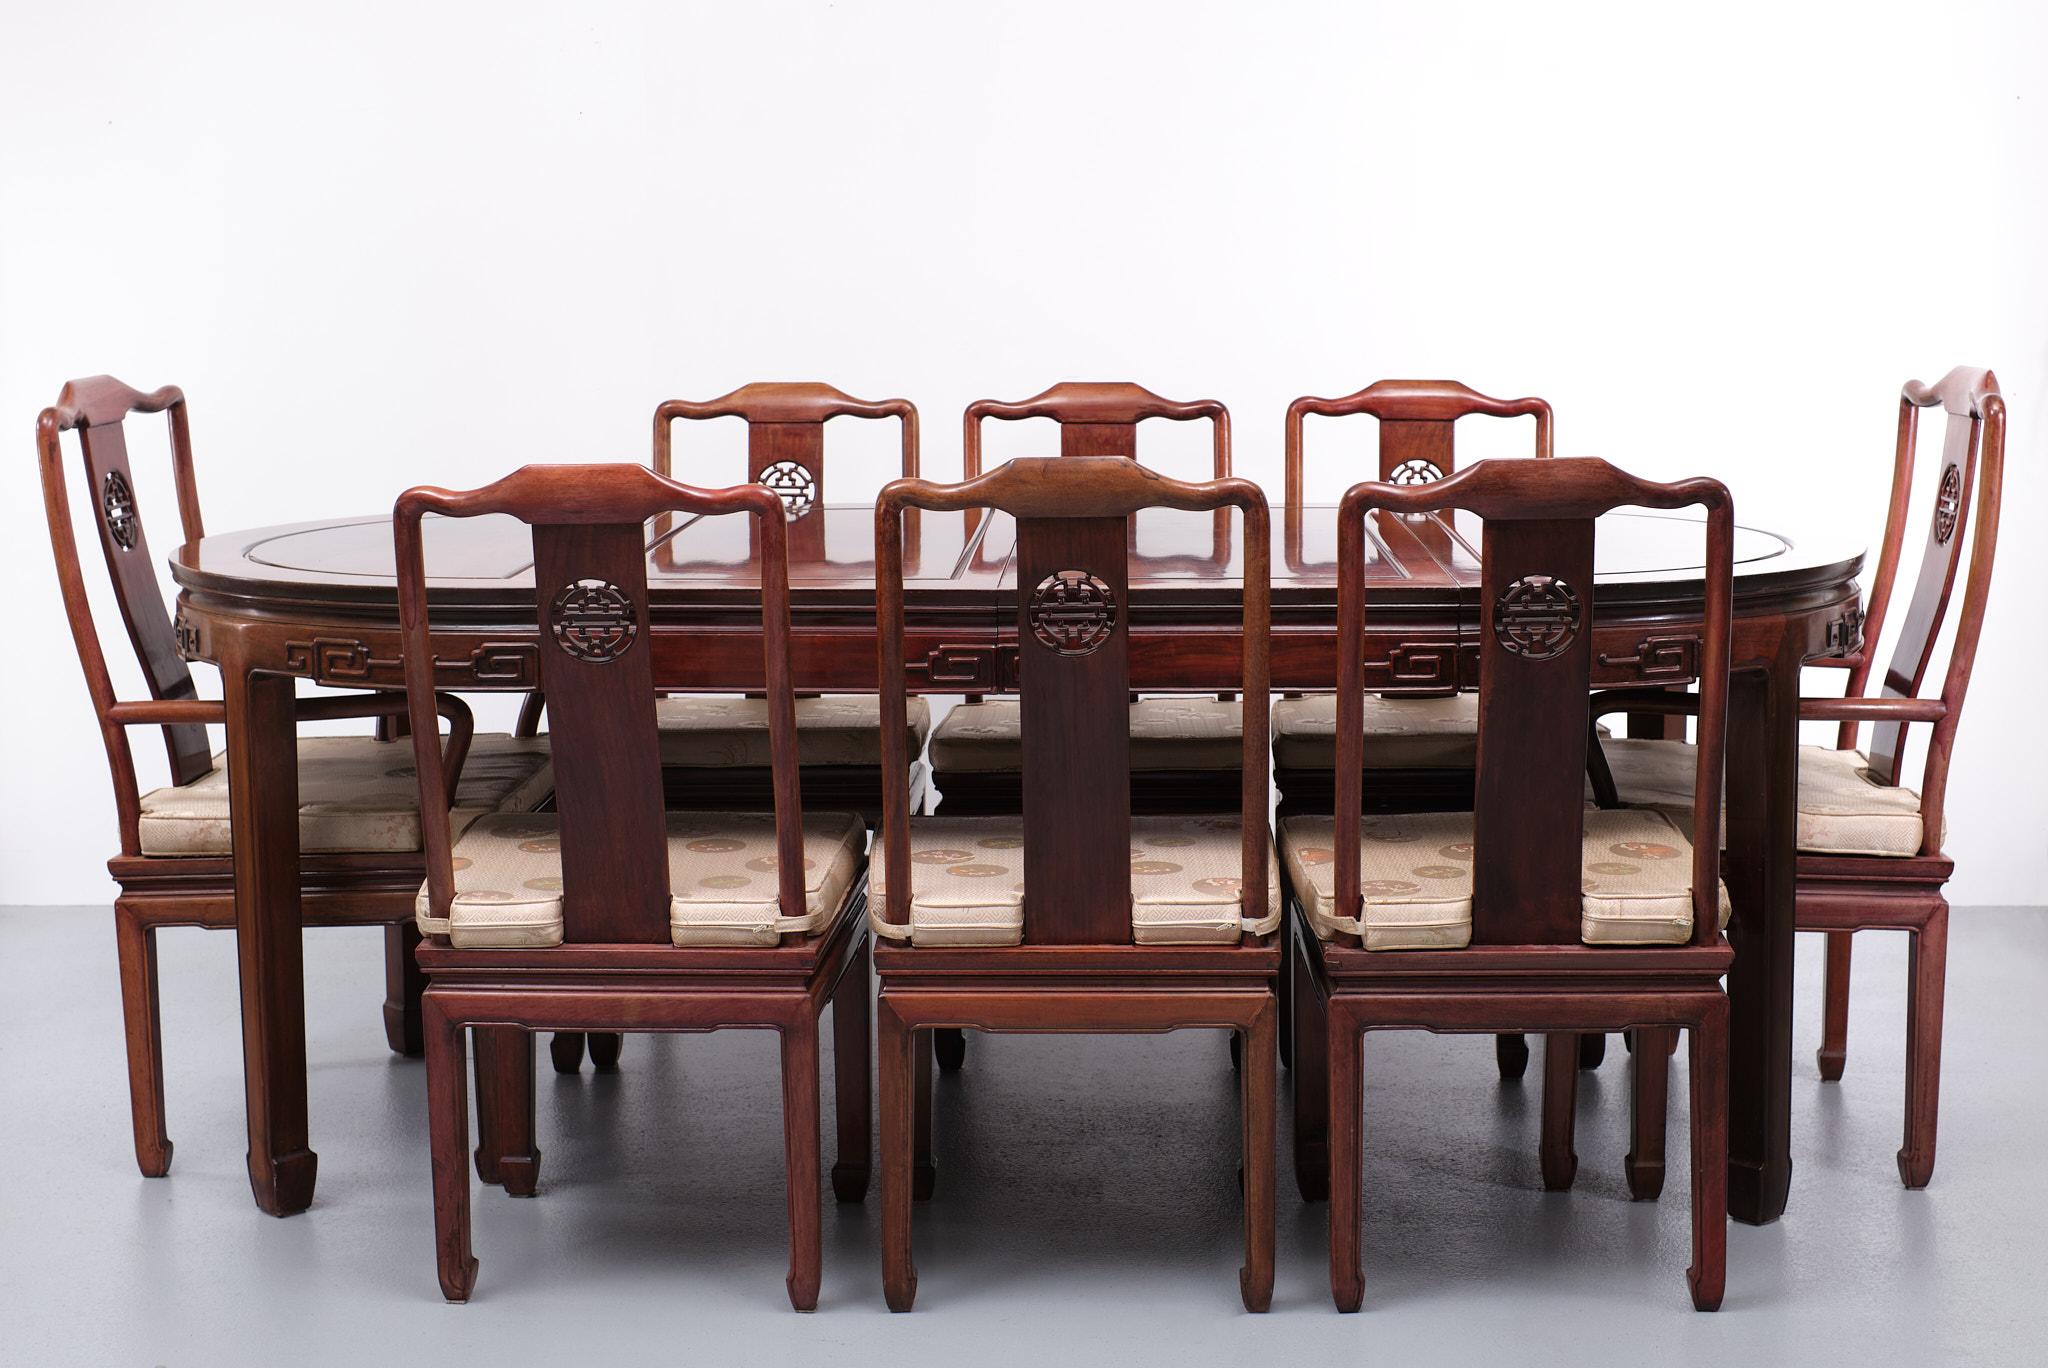 Large Chinese dining set, 8 Chairs 2 armchairs 6 dining chairs, with the original Silk cushions some of the cushions are used comes with a extendable dining table . 
Round table with 2 extra leafs makes it a Oval shaped dining table. hand carved